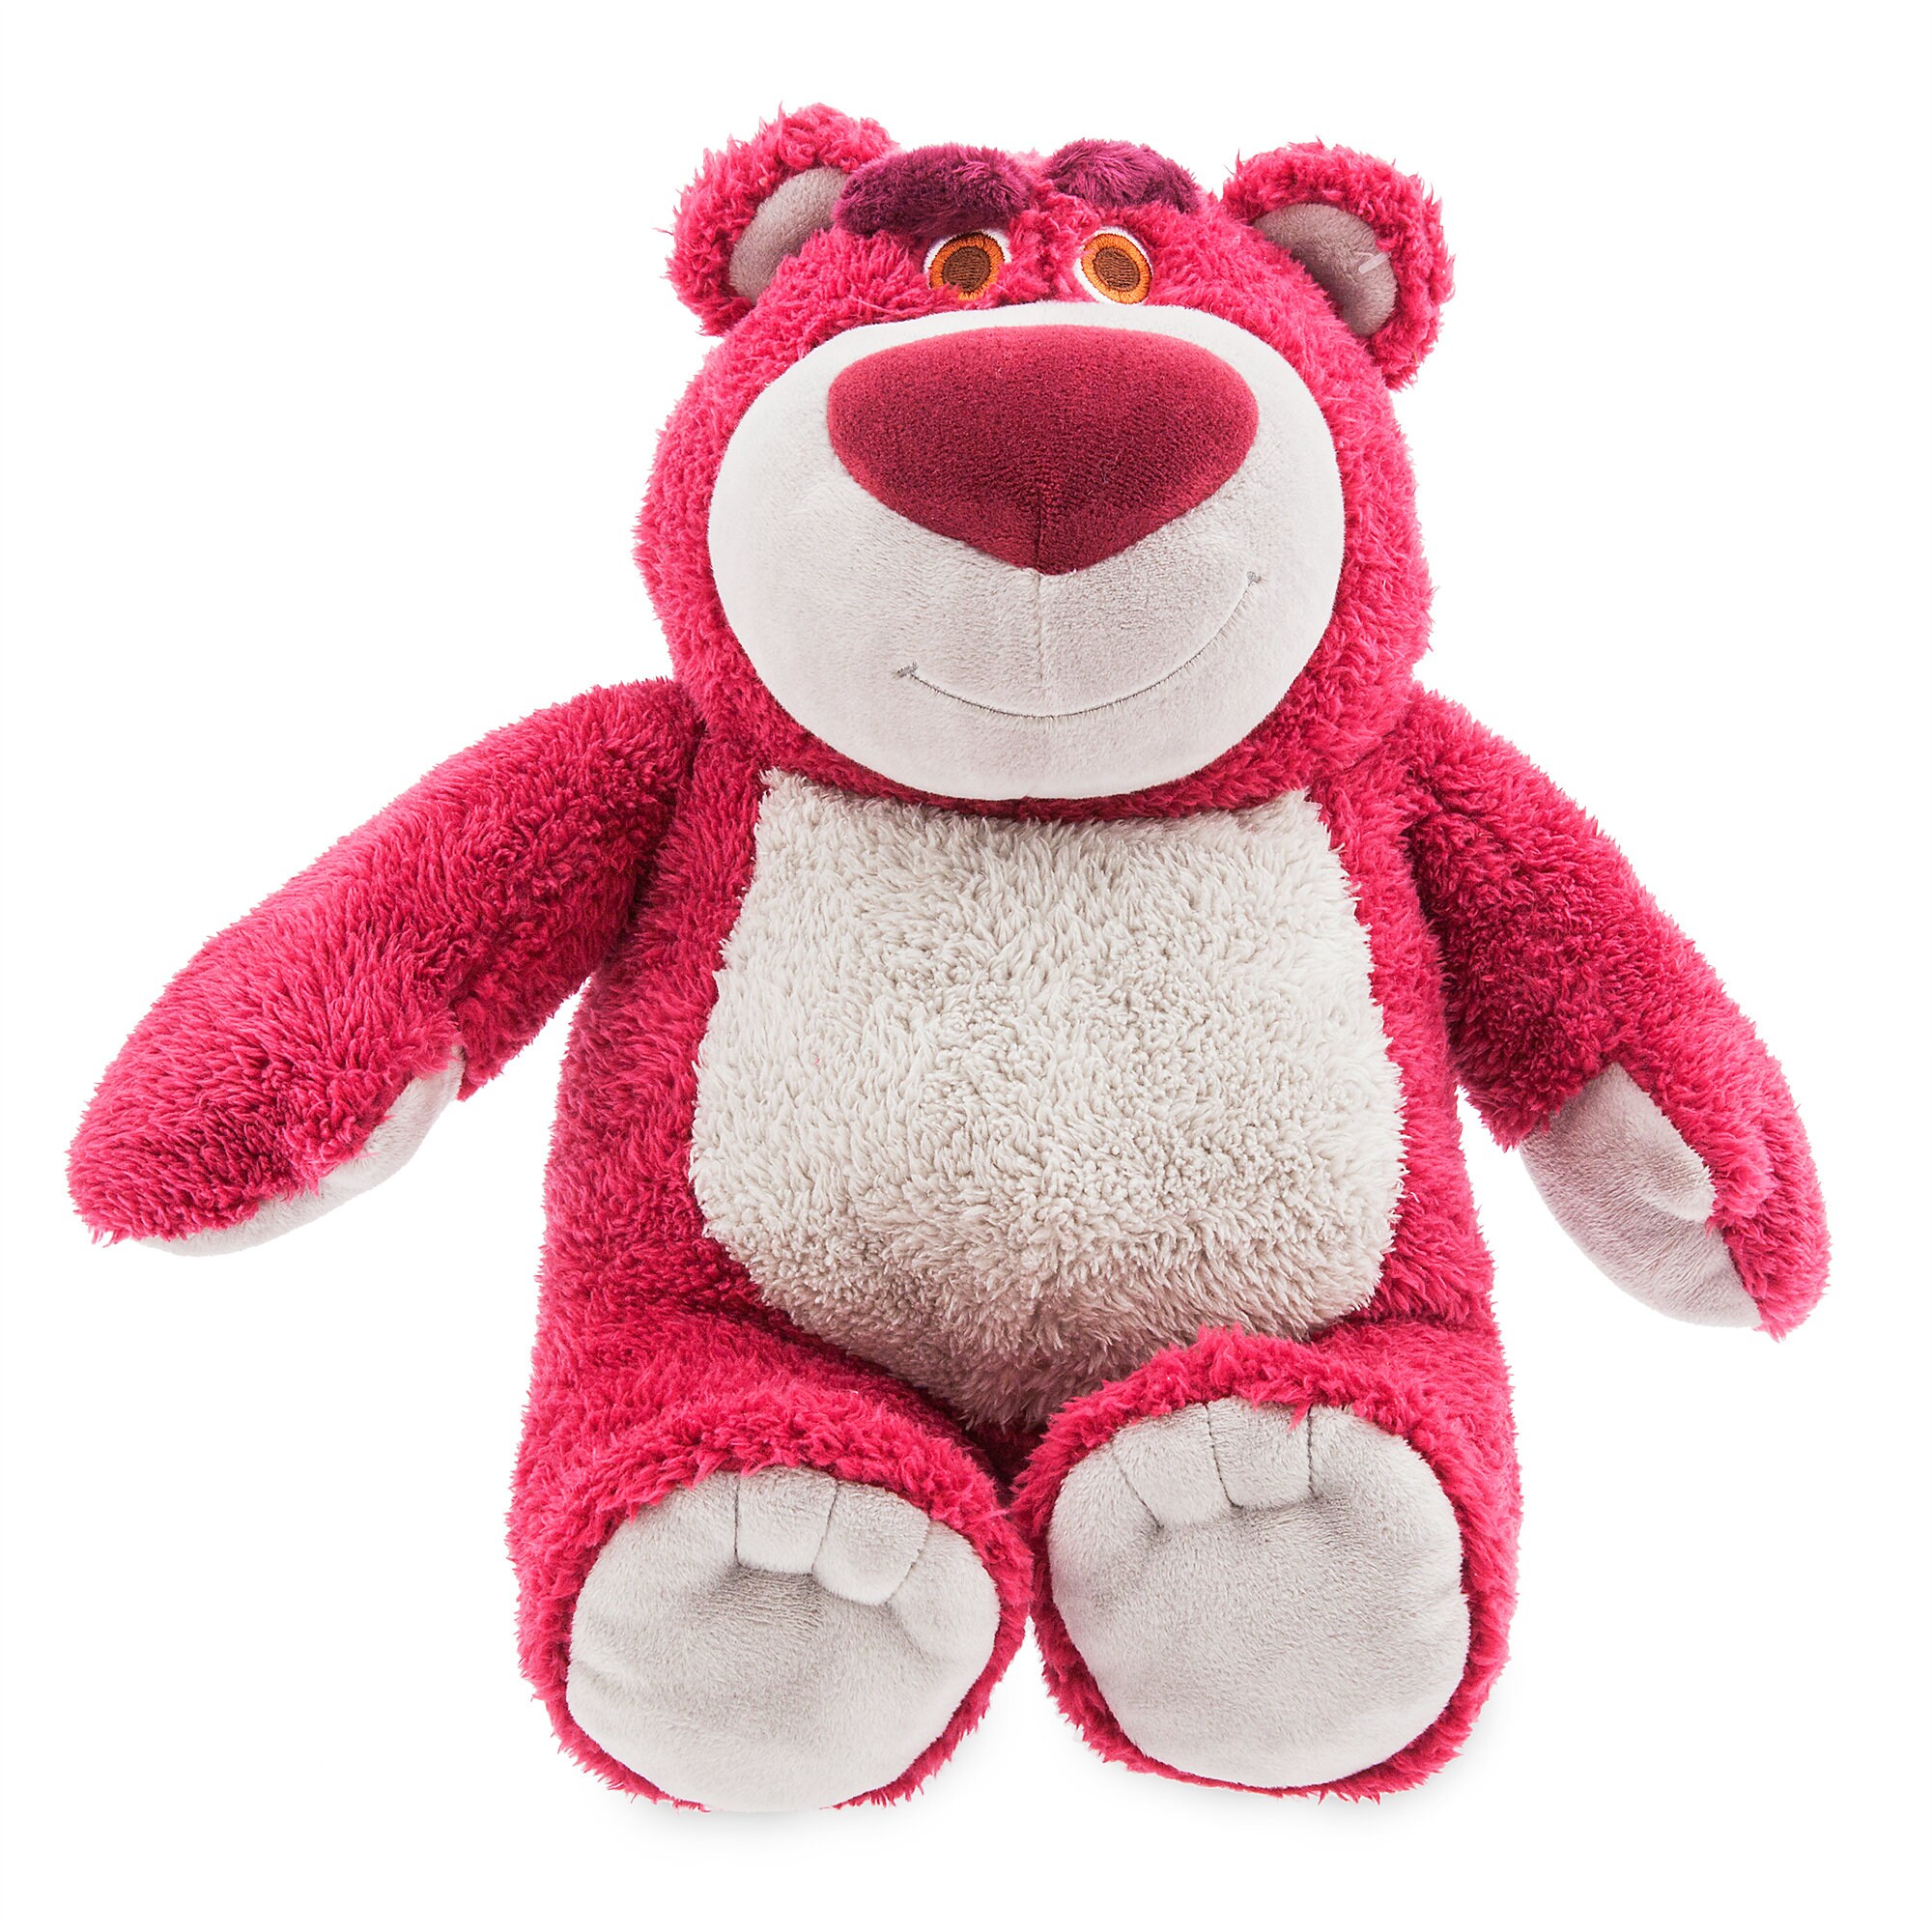 Lotso Scented Plush - Toy Story - Medium - 12'' - Personalized